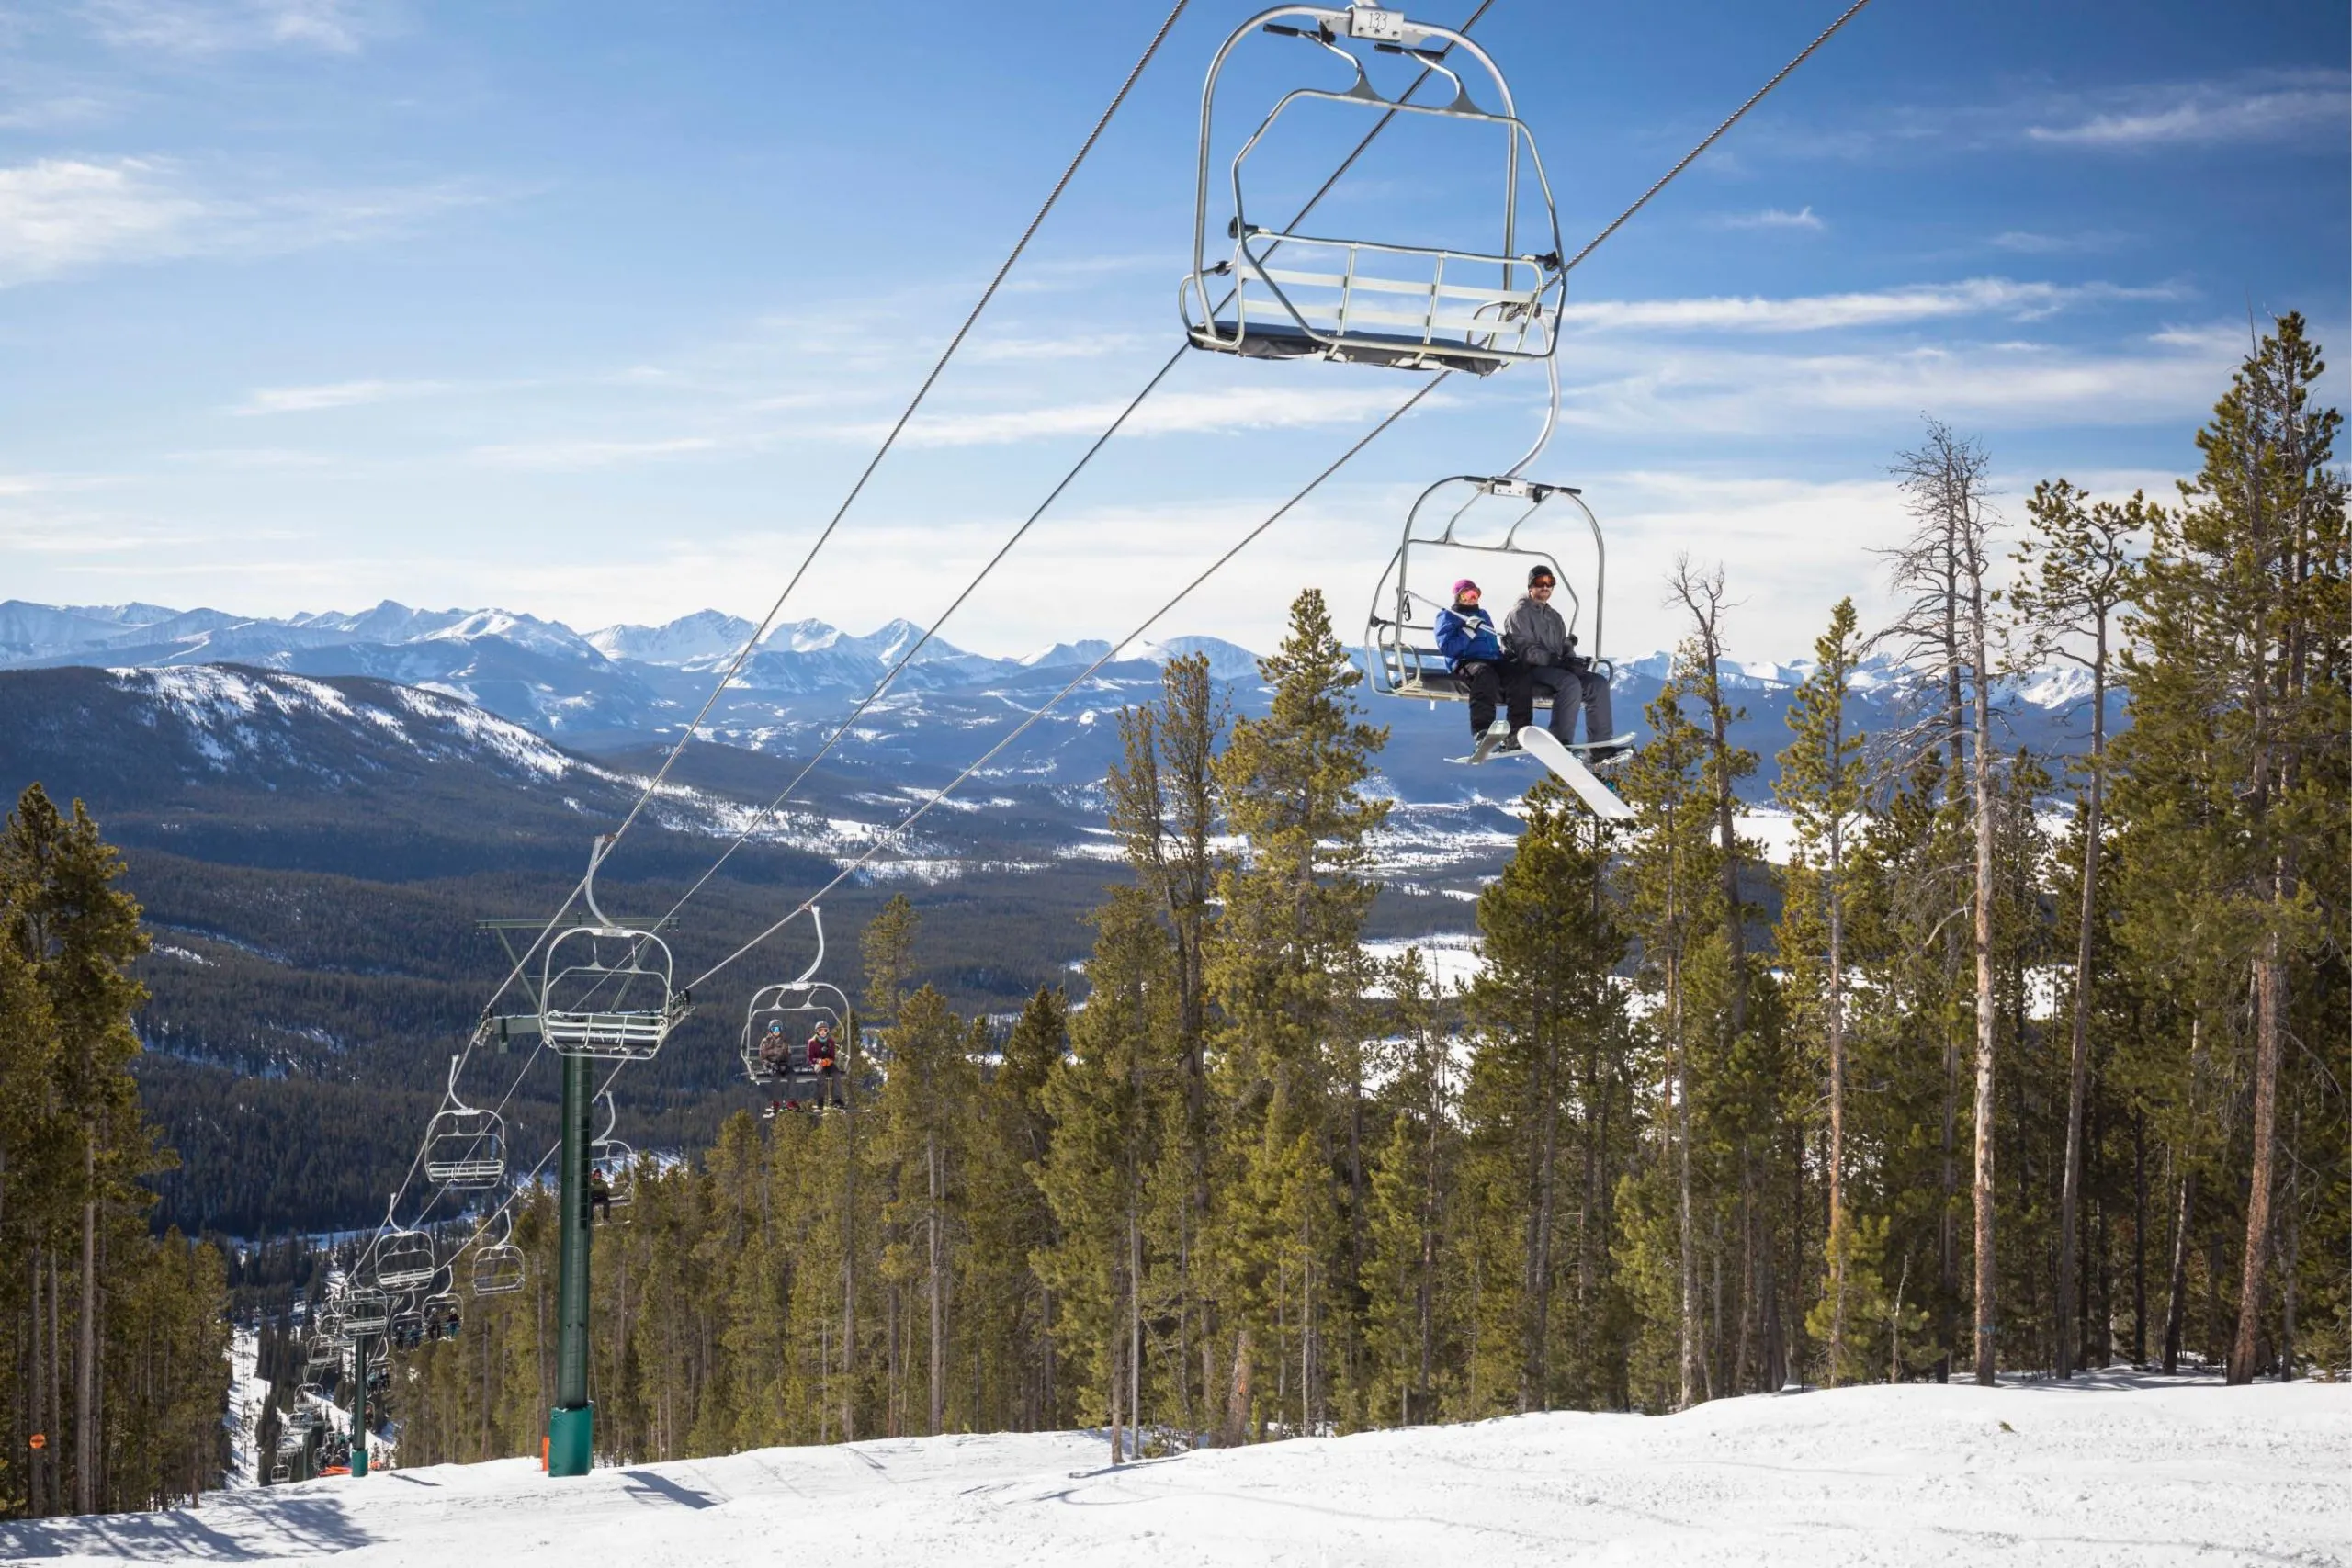 Two people on a ski lift